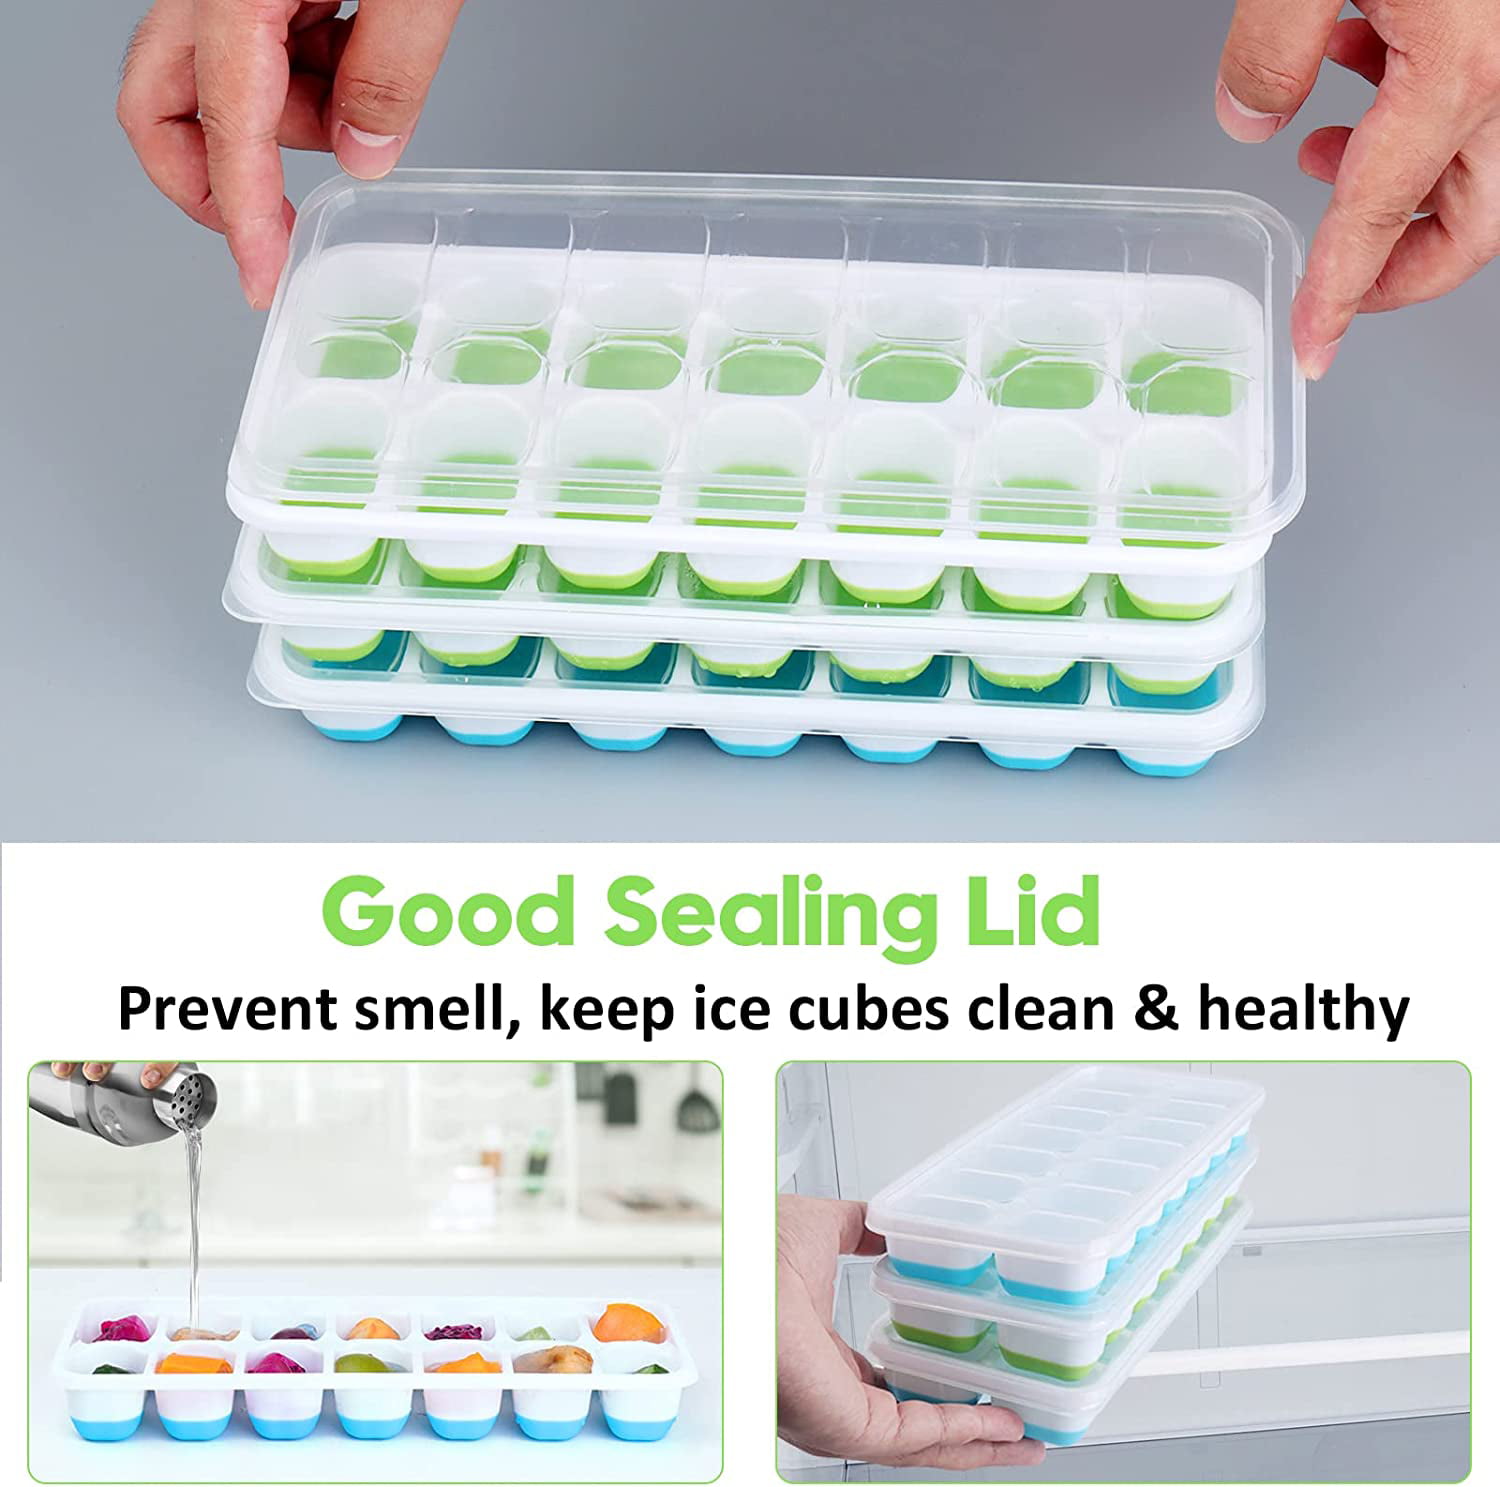 Polar Ice Products Silicone Ice Cube Trays Easy Release Design with Spill  Resistant Removable Safety Lid. 2 Pack (Blue) 